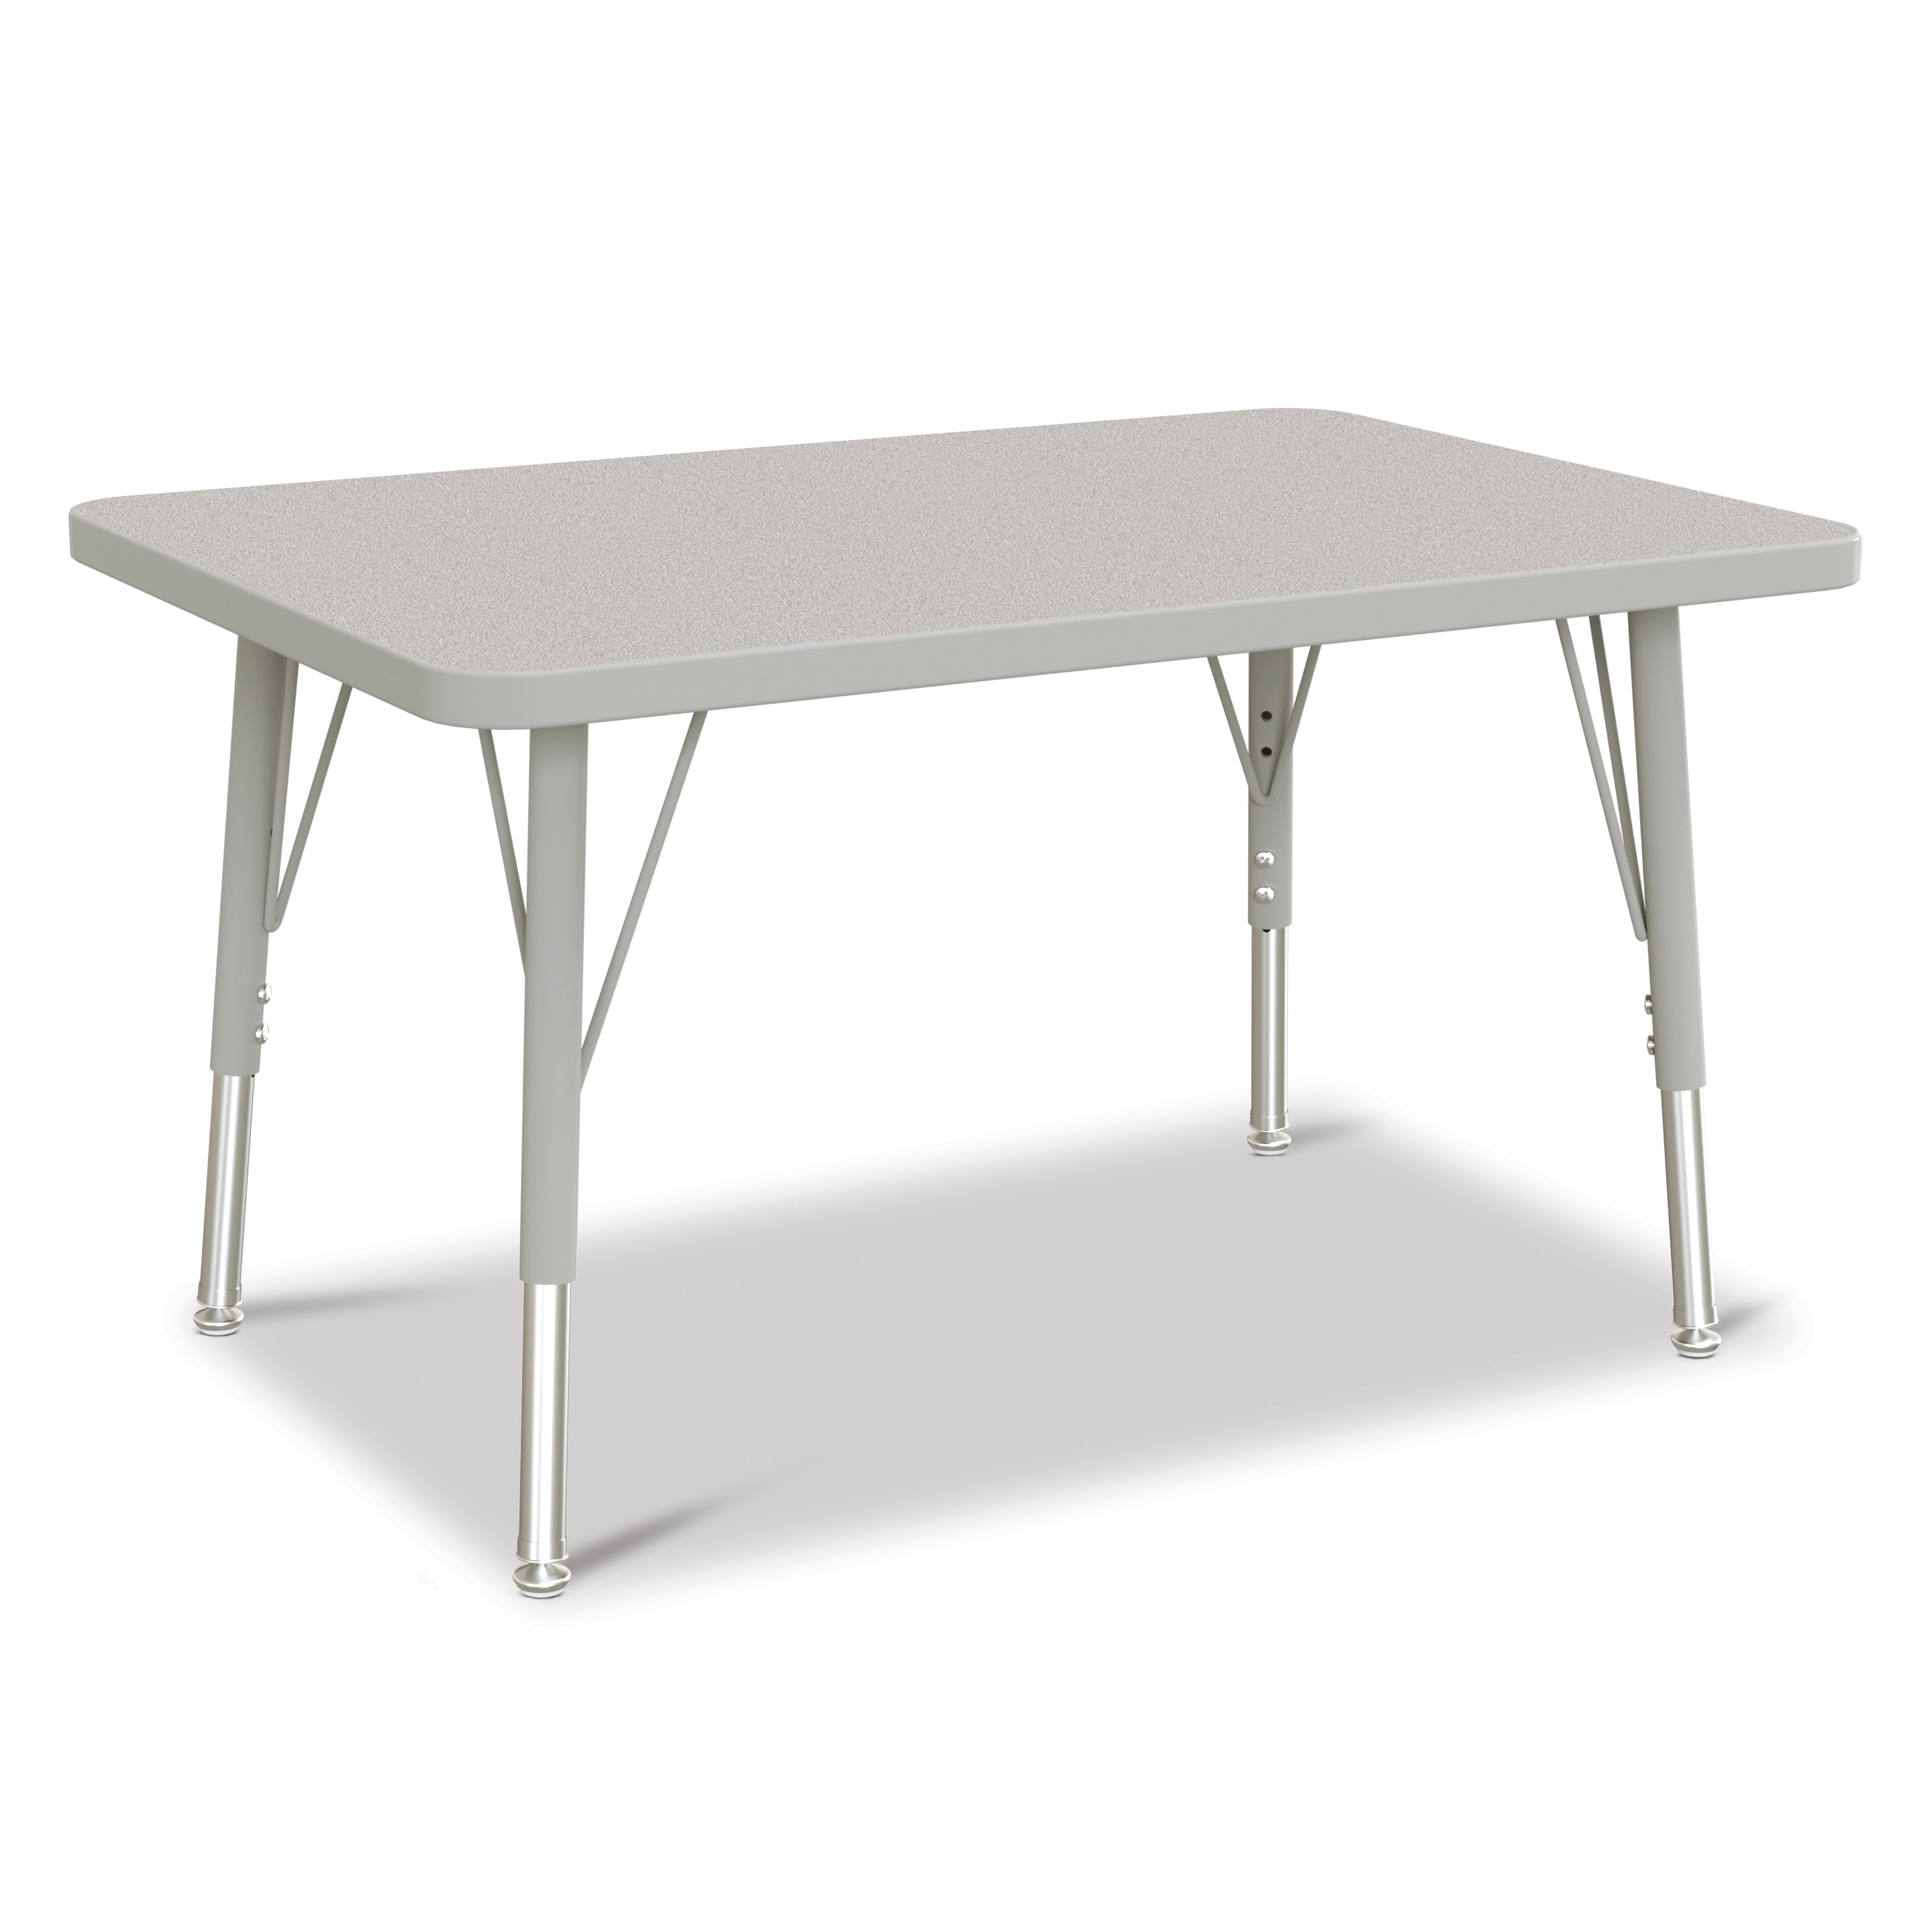 6478JCE000, Berries Rectangle Activity Table - 24" X 36", E-height - Freckled Gray/Gray/Gray